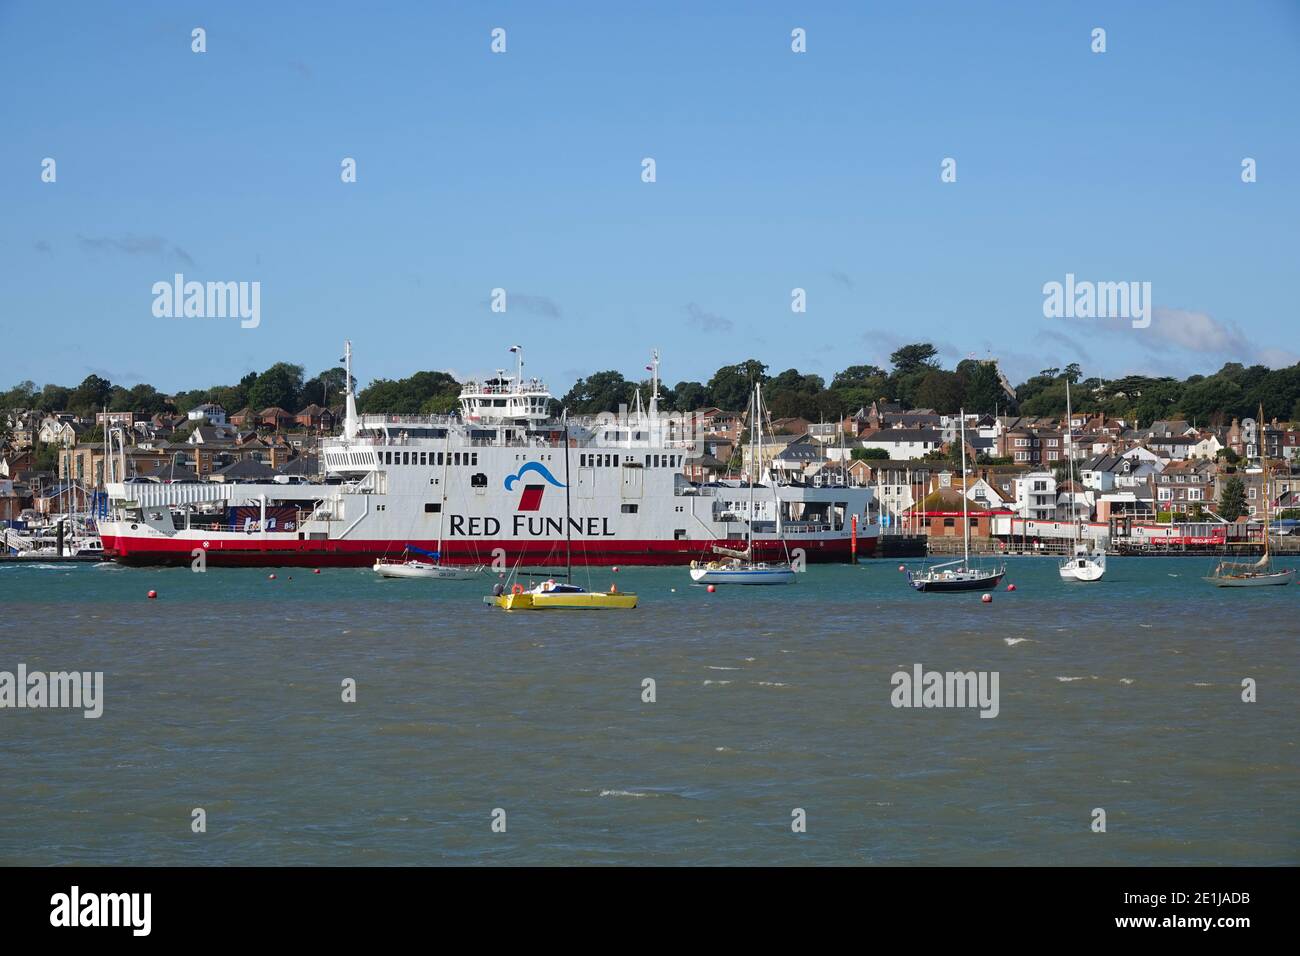 The Red Funnel car ferry Red Falcon leaving Cowes on the Isle of Wight in England, UK Stock Photo